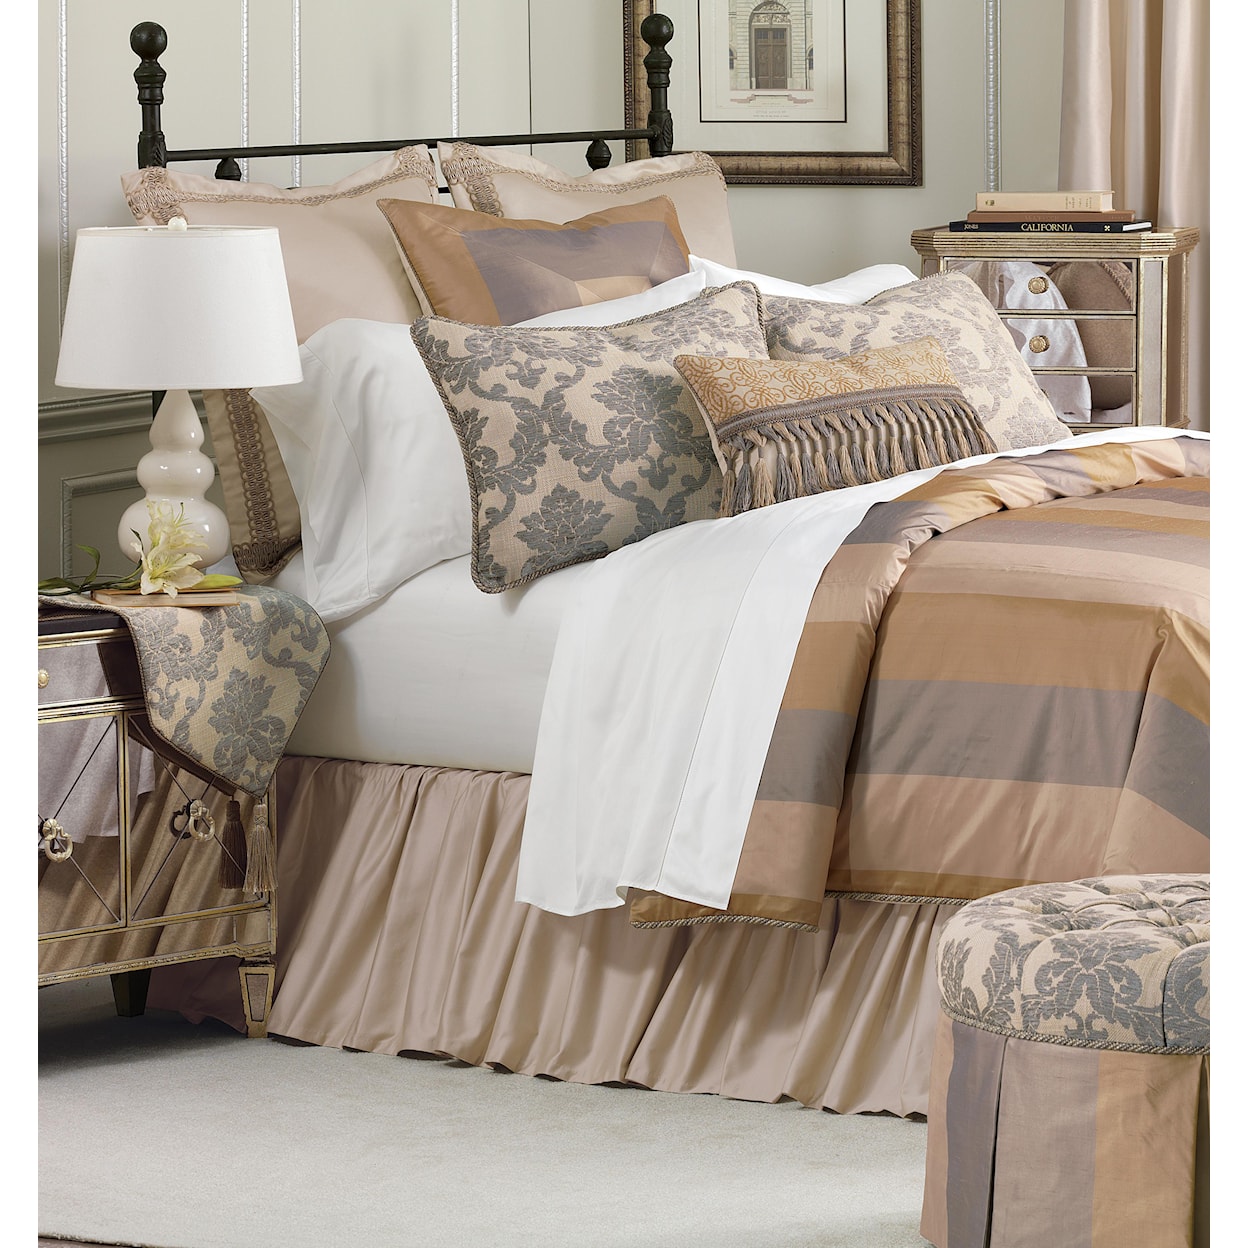 Eastern Accents Lancaster Twin Bedset